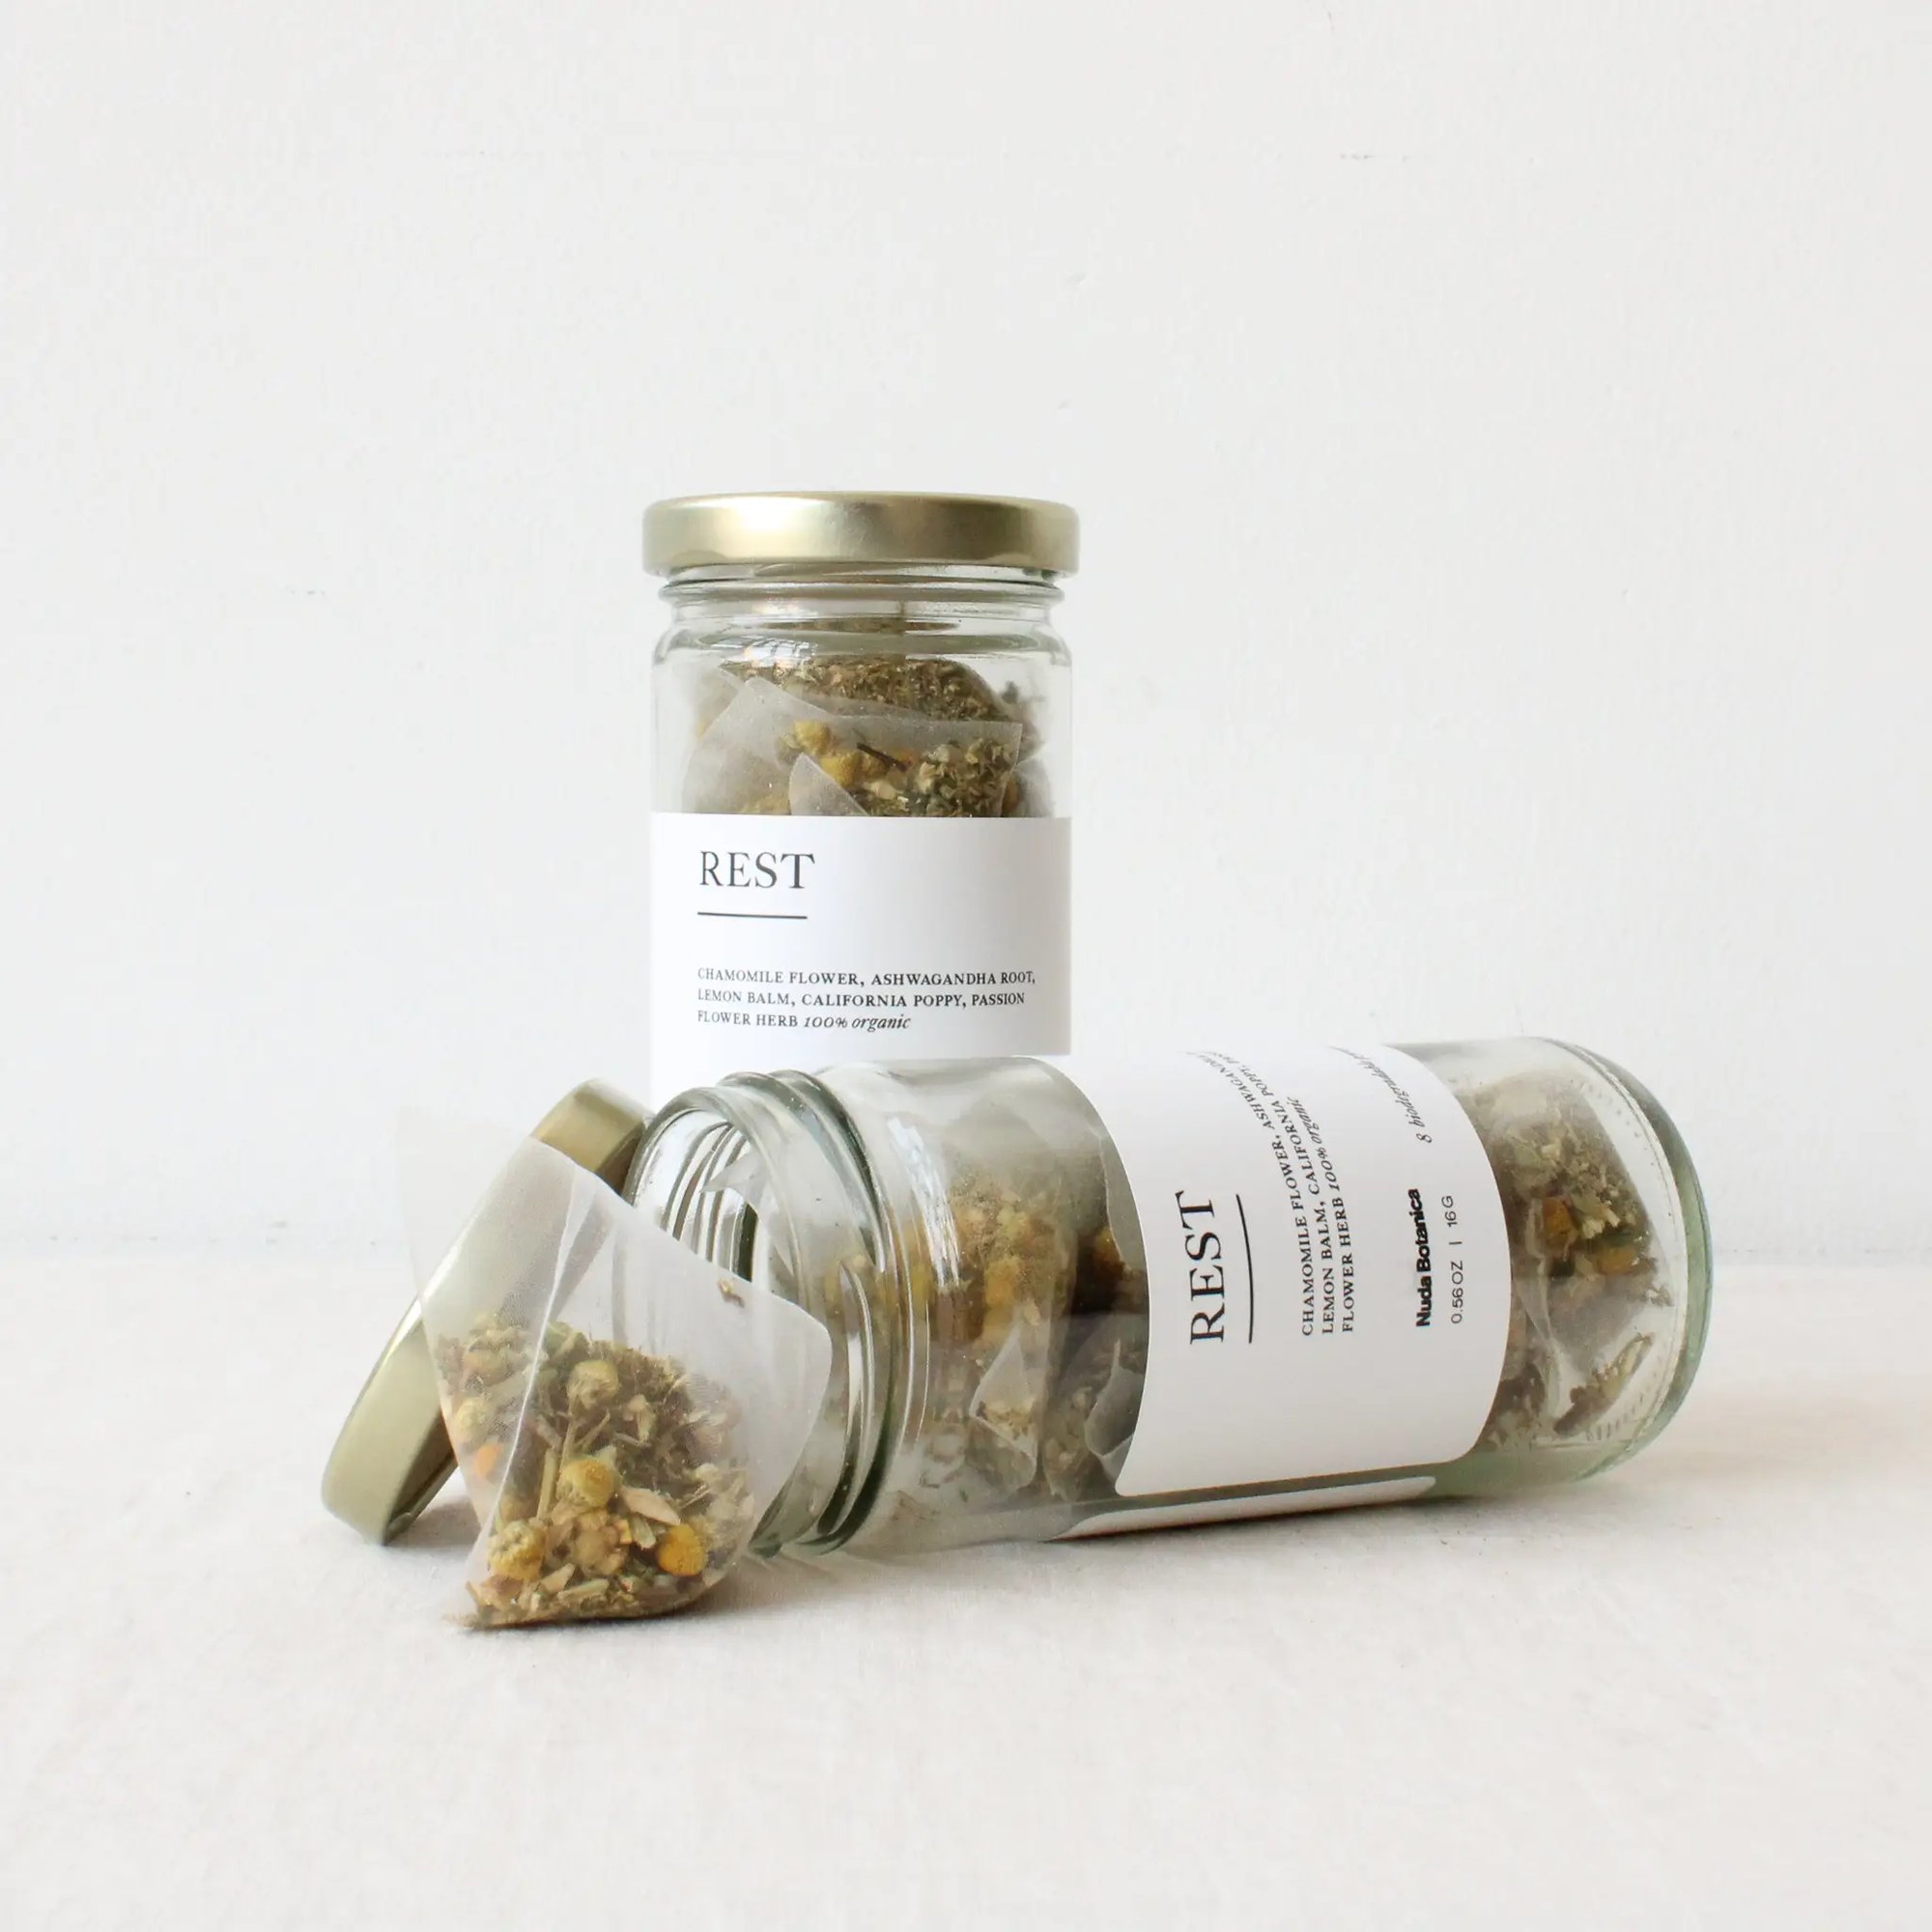 Image of "Time to Rest" Herbal Blend